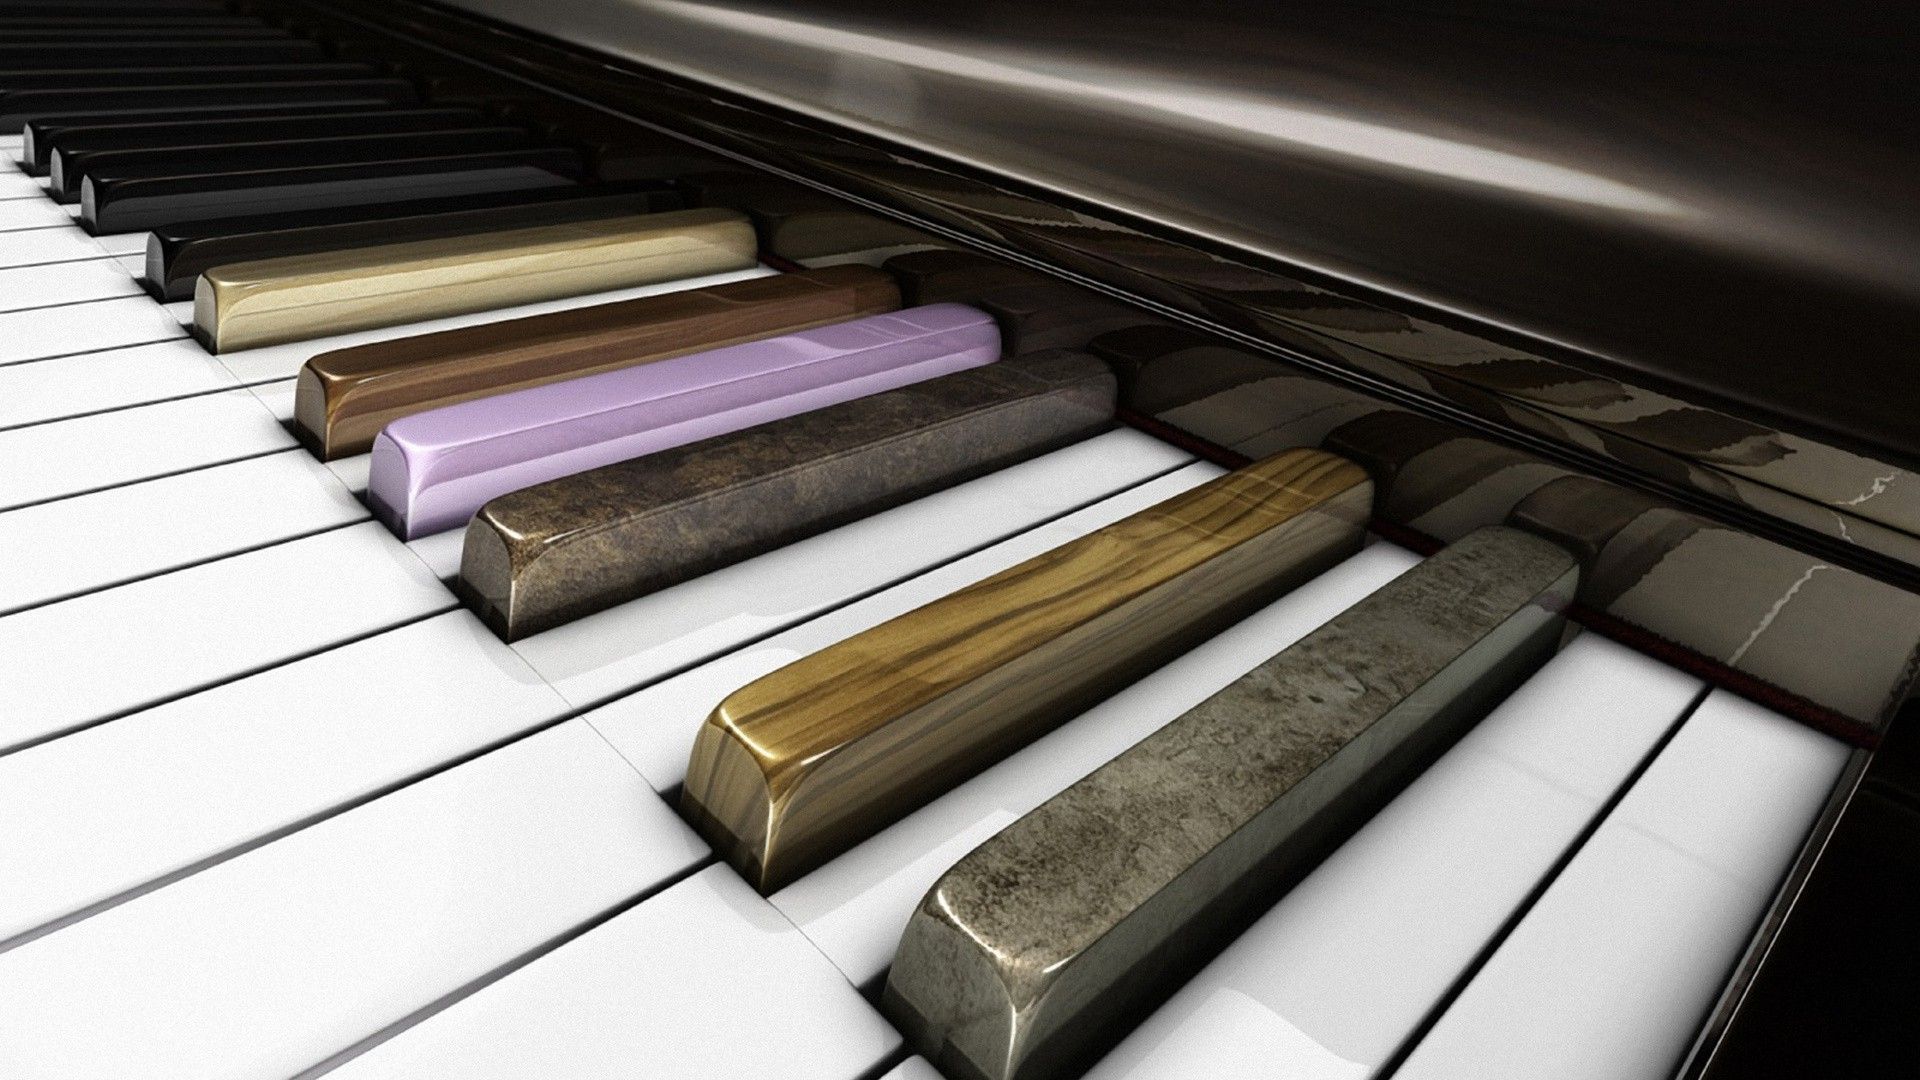 The keys of a piano are seen in this file photo. - Piano